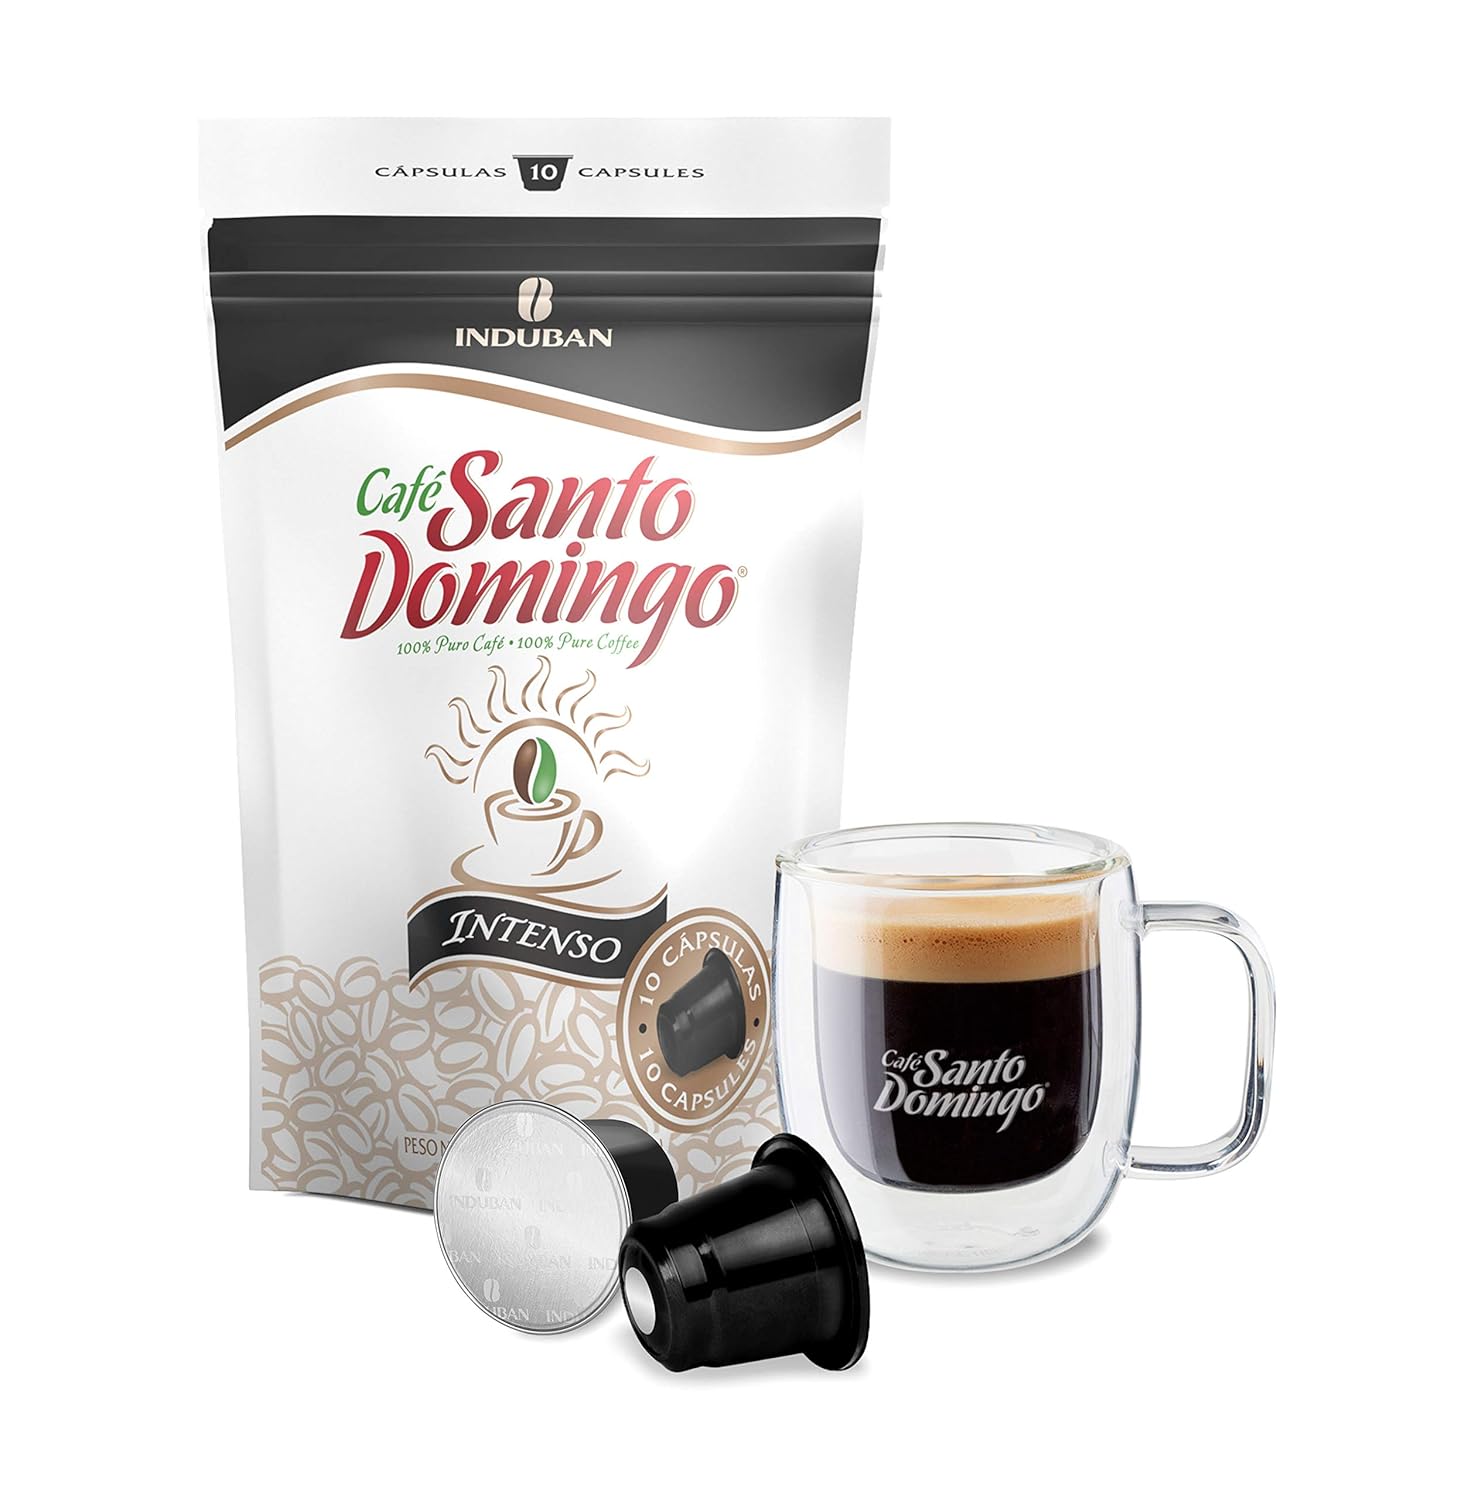 Santo Domingo Coffee Intenso Capsules - Compatible with Nespresso Original Brewers - Product from the Dominican Republic (10 Count) : Grocery & Gourmet Food